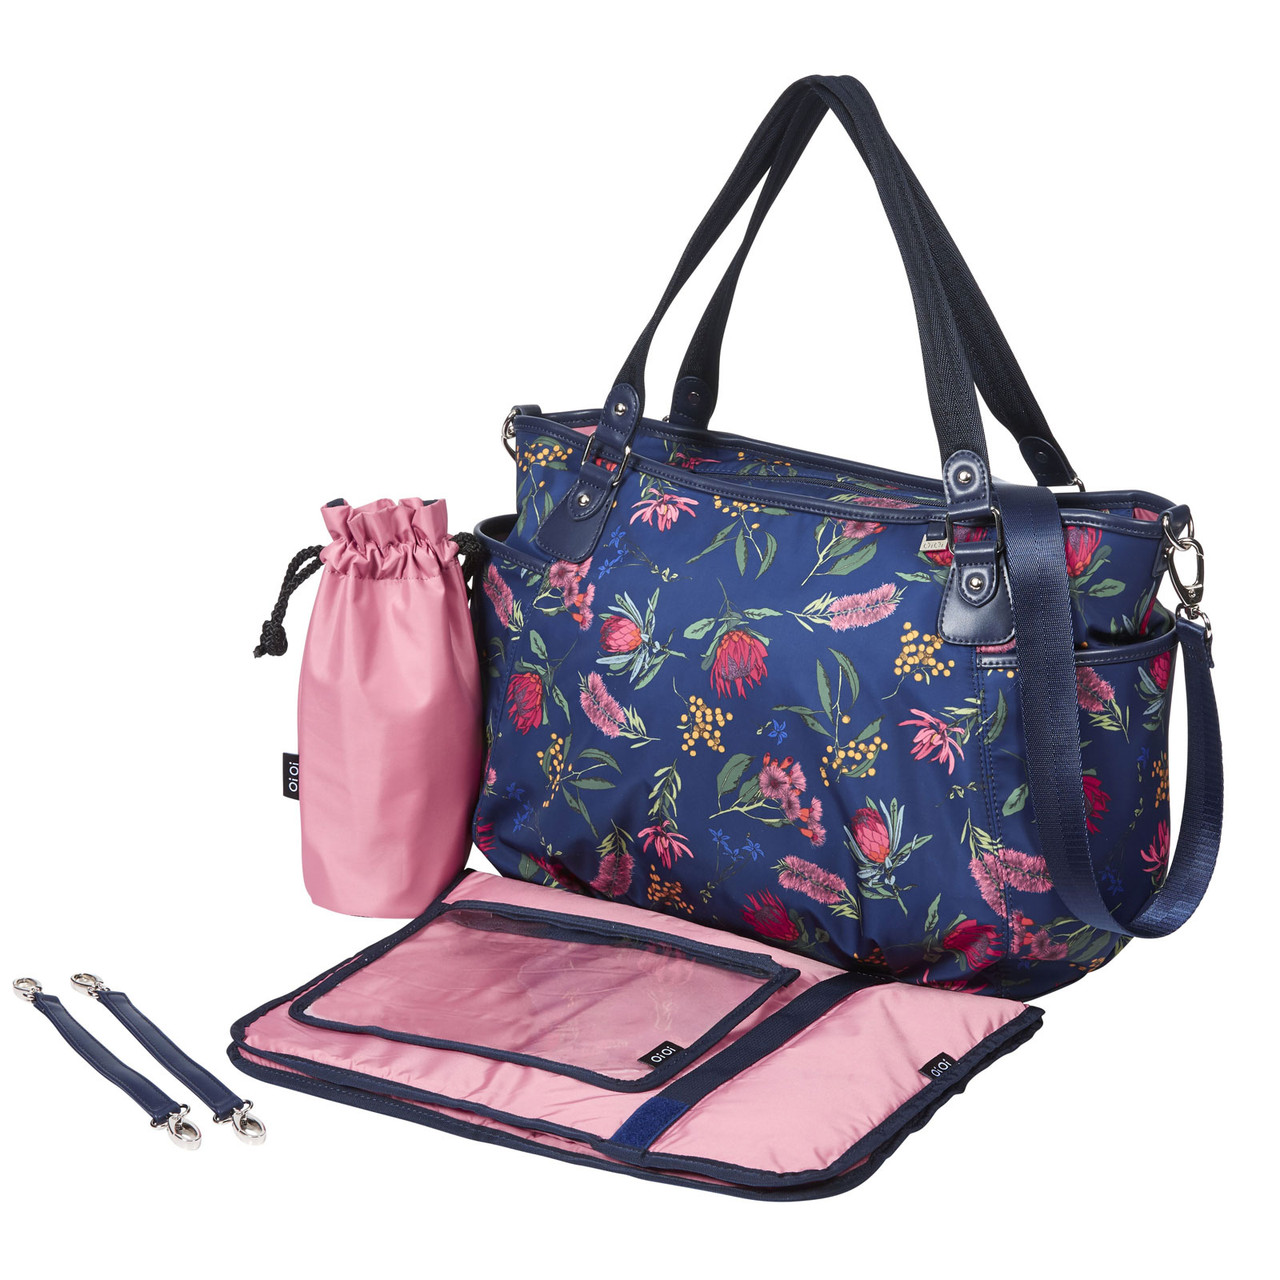 OiOi Tote Nappy Bag - Botanical Navy. Shop Baby Change Bags Online